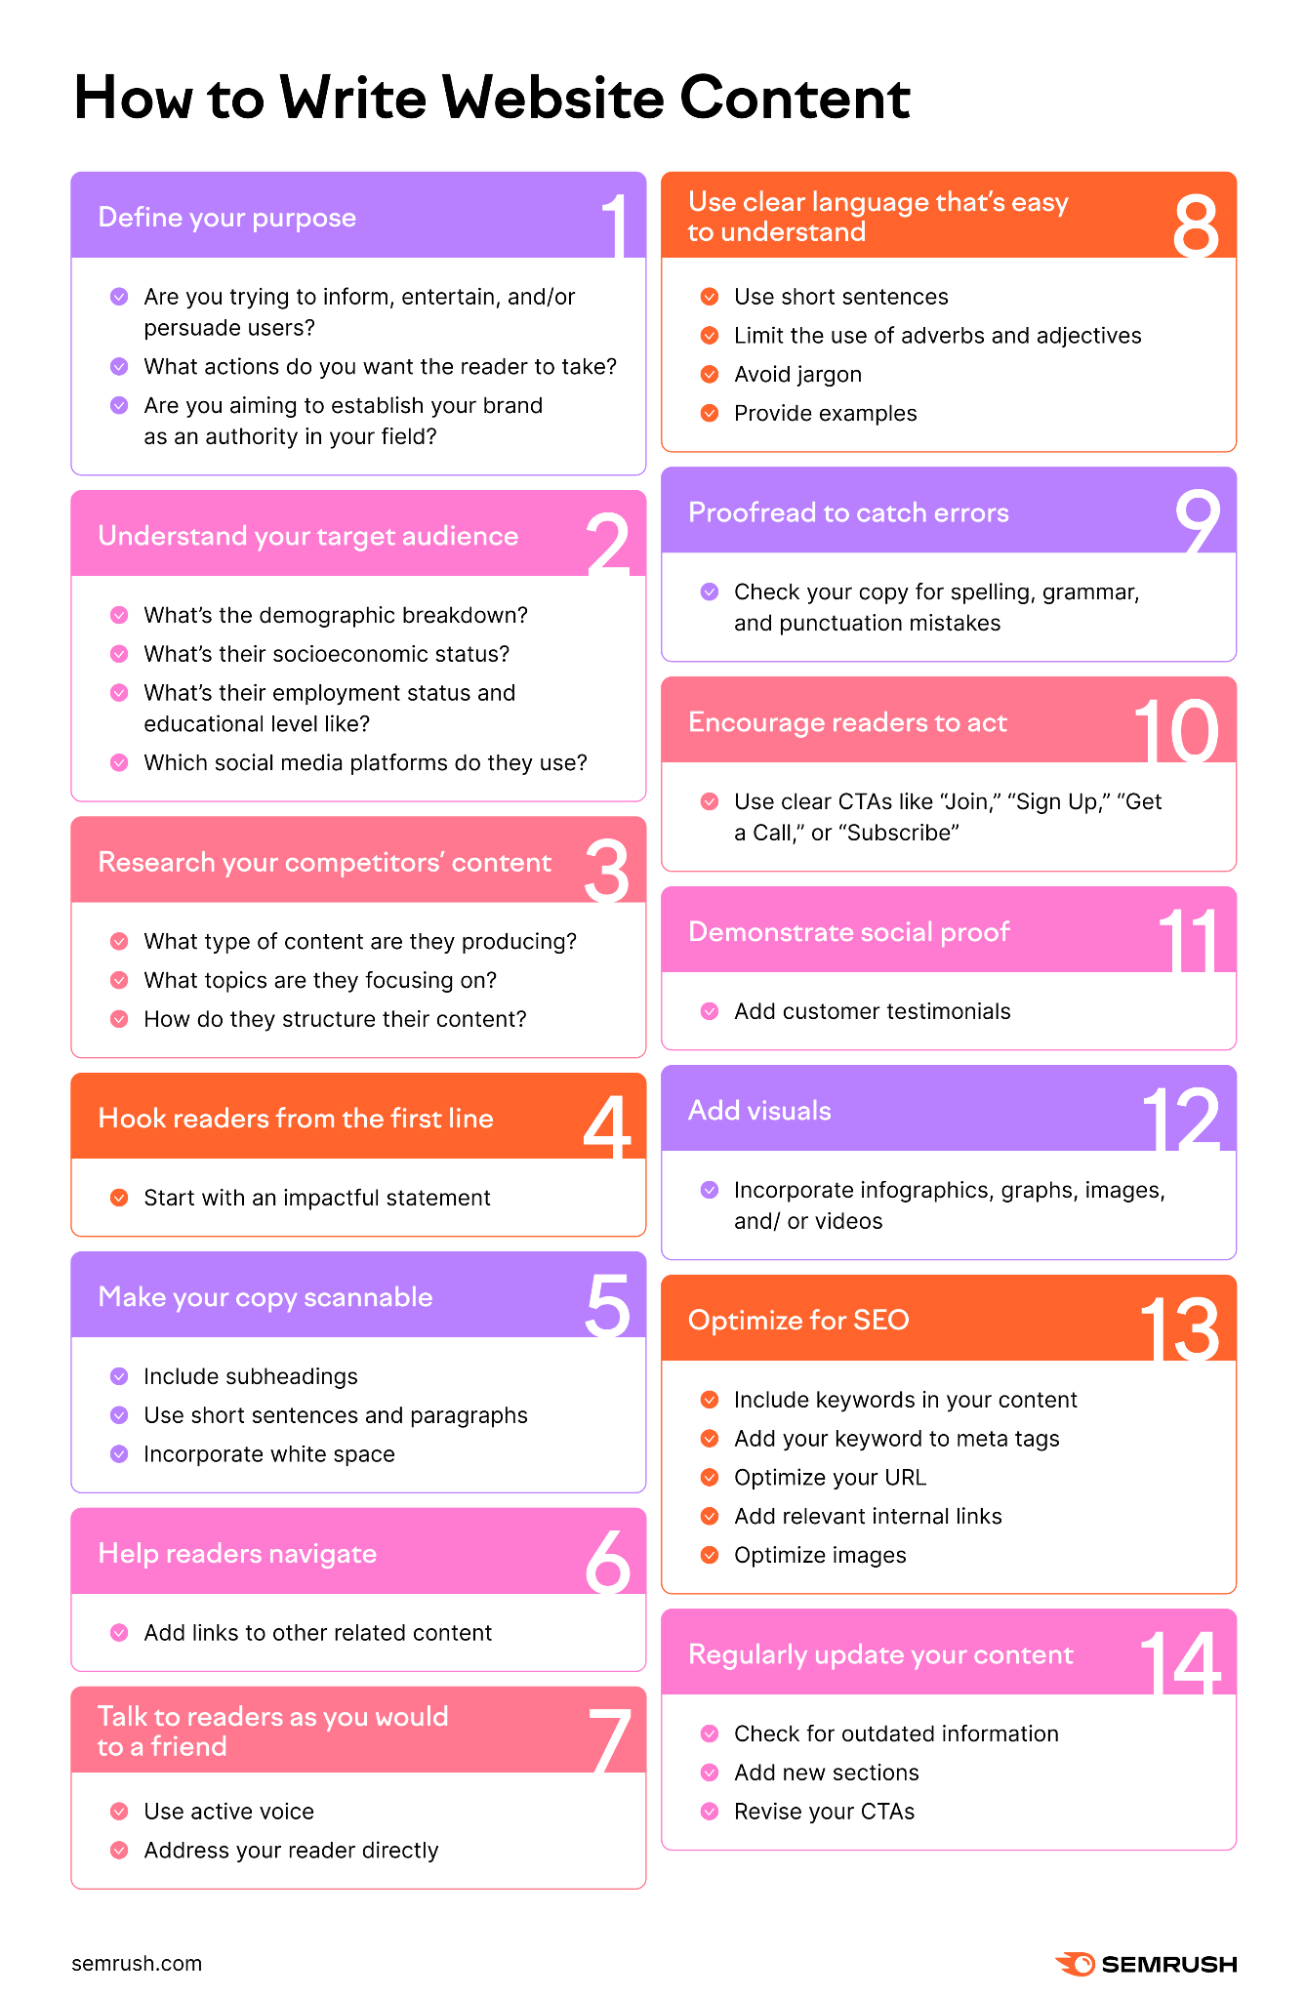 An infographic listing 14 tips on how to write website content